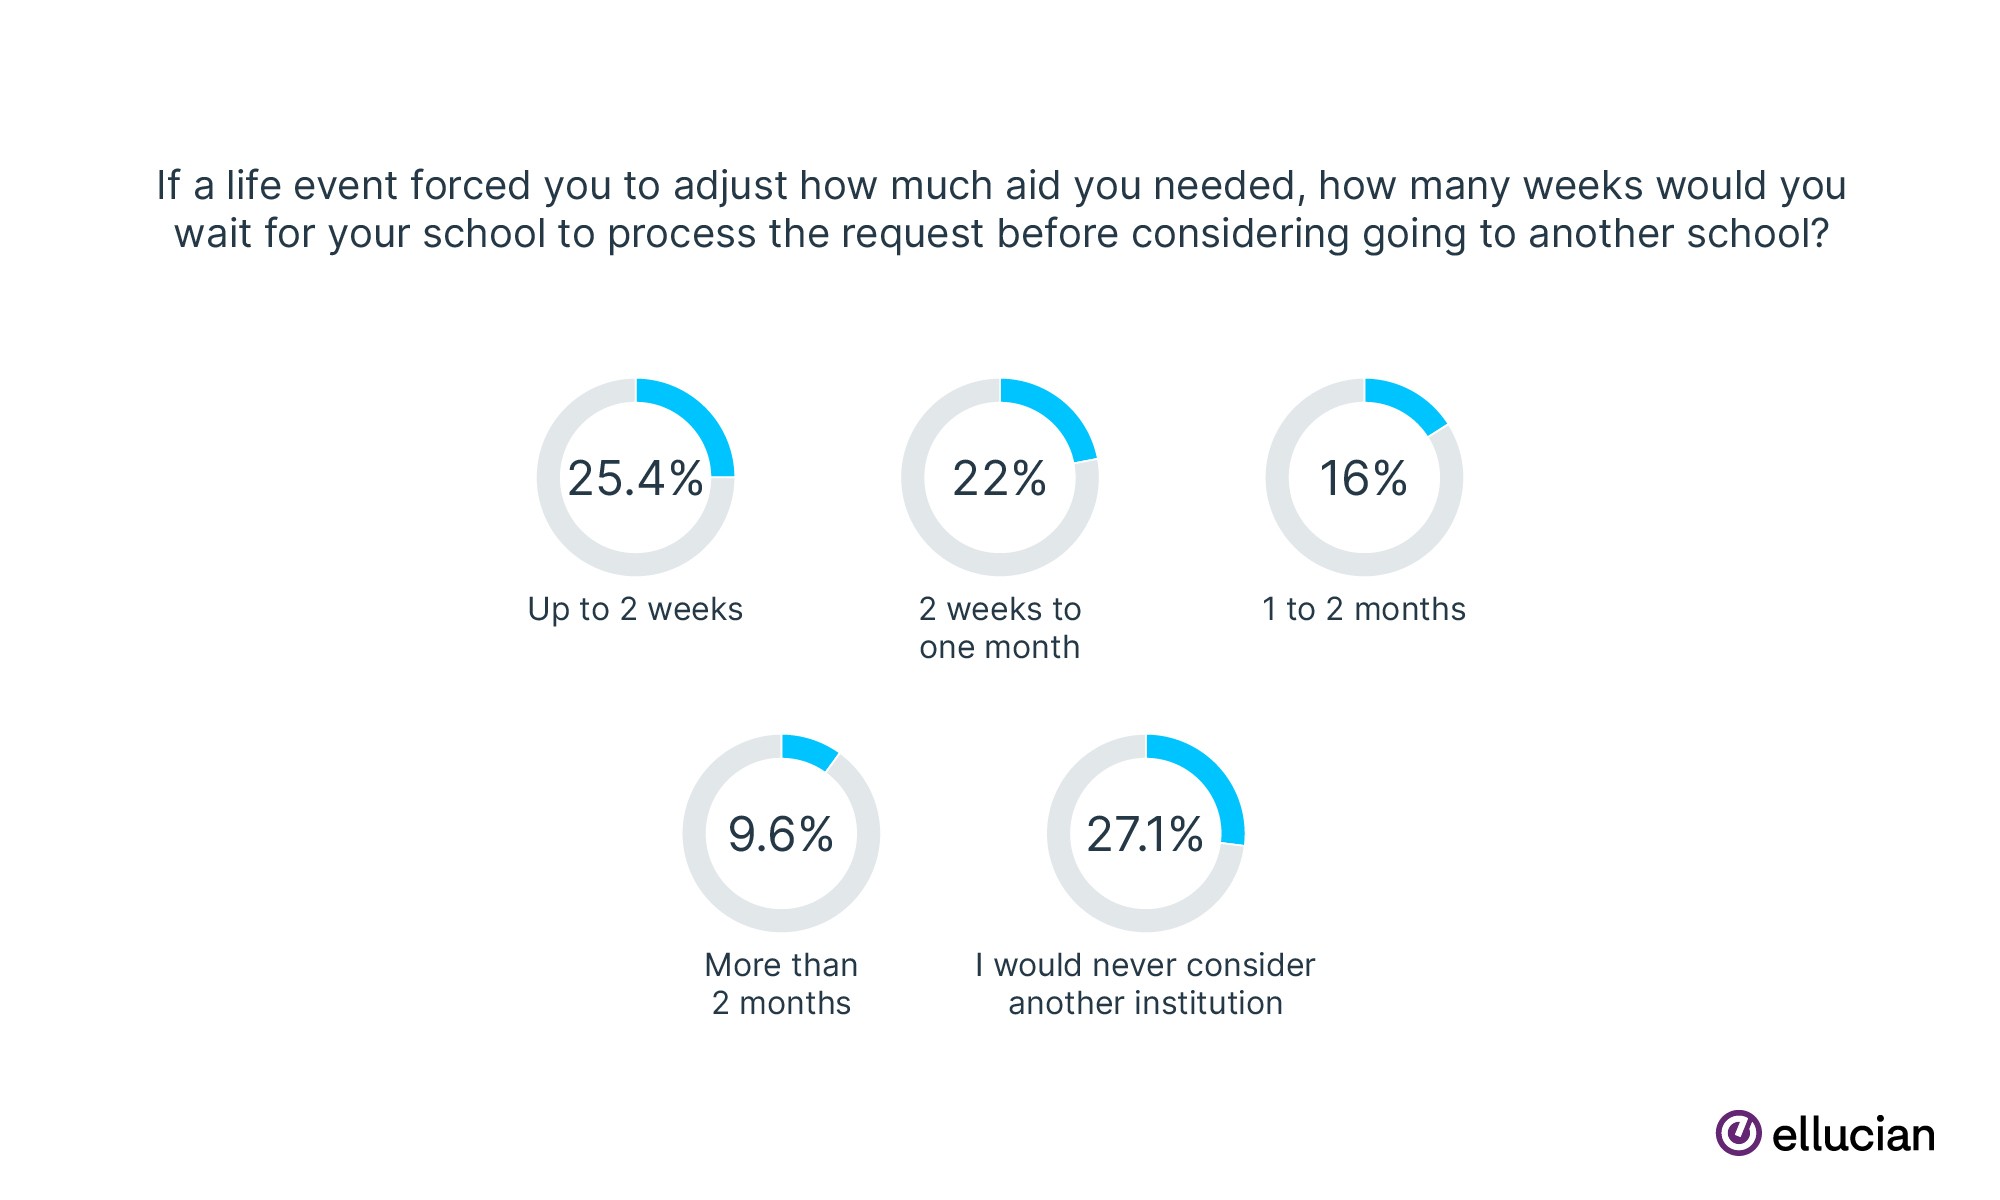 If a life event forced you to adjust how much aid you needed, how many weeks would you wait for your school to process the request before considering going to another school?